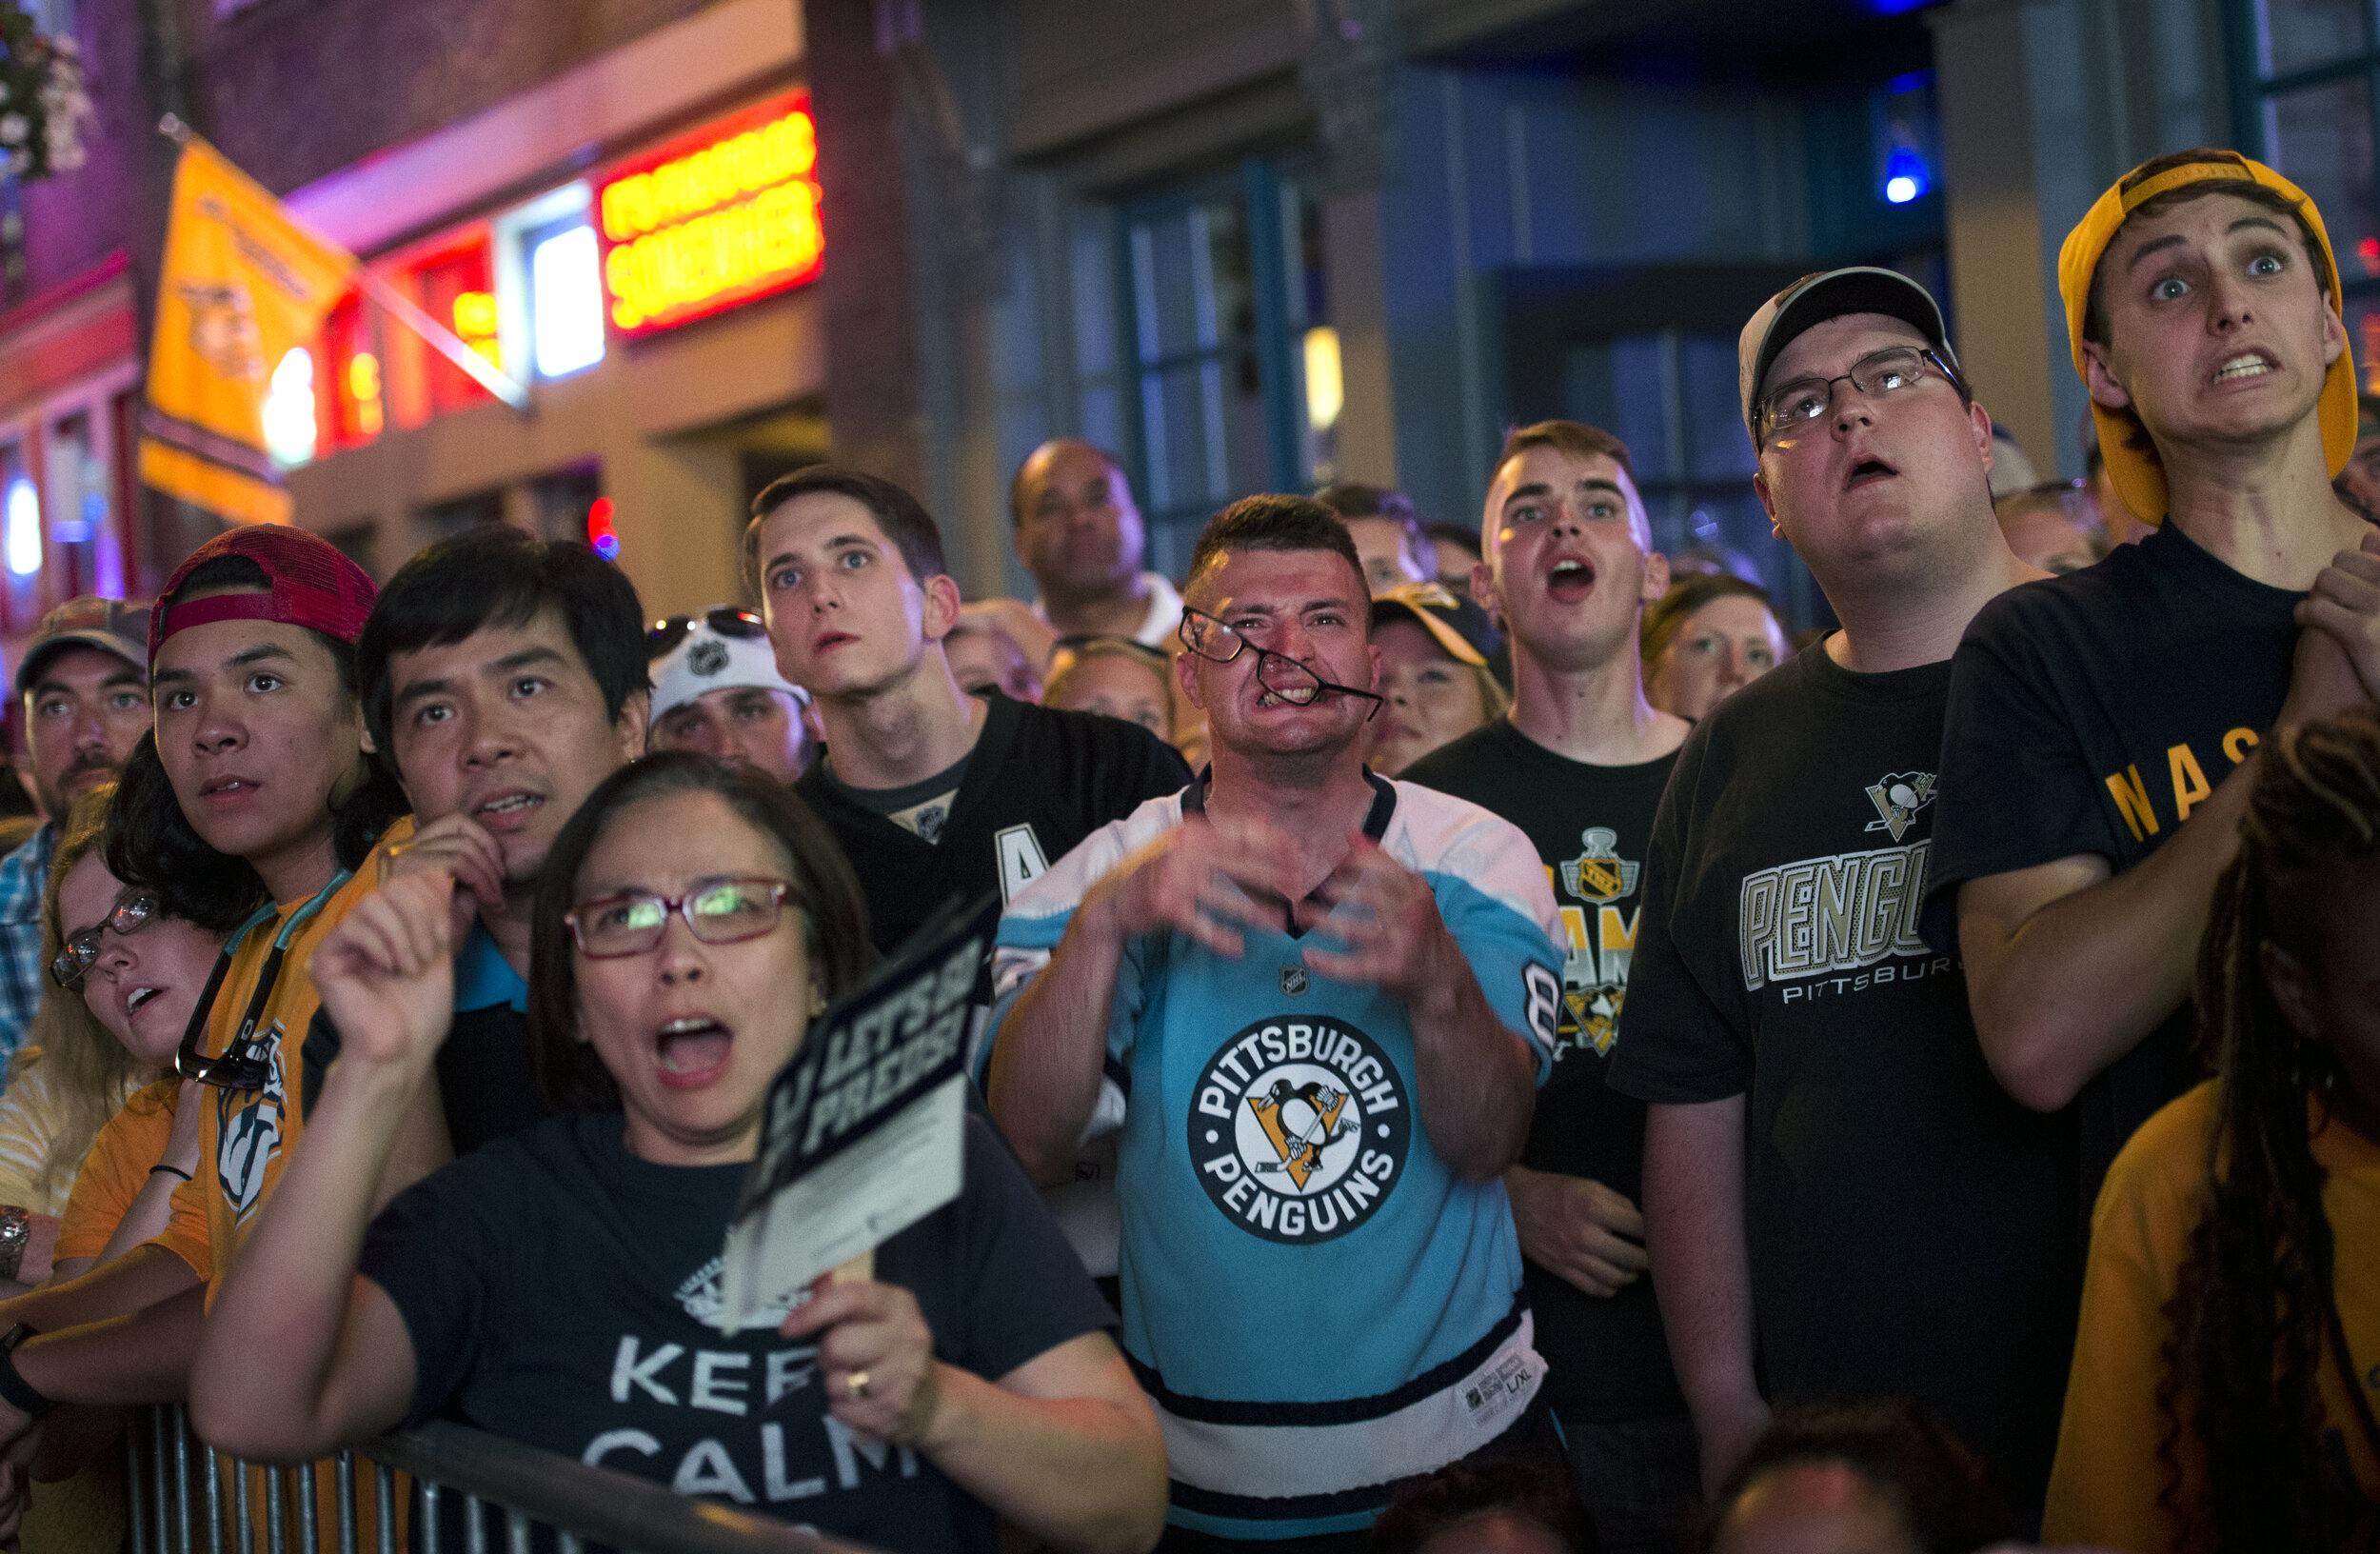  Eyeglasses fly off the face of Matt Jenkins Castro from Pittsburgh as he reacts to a scoring opportunity against the Nashville Predators during a screening of game 3 of the Stanley Cup Final on Saturday, June 3, 2017 along Broadway in Nashville.  